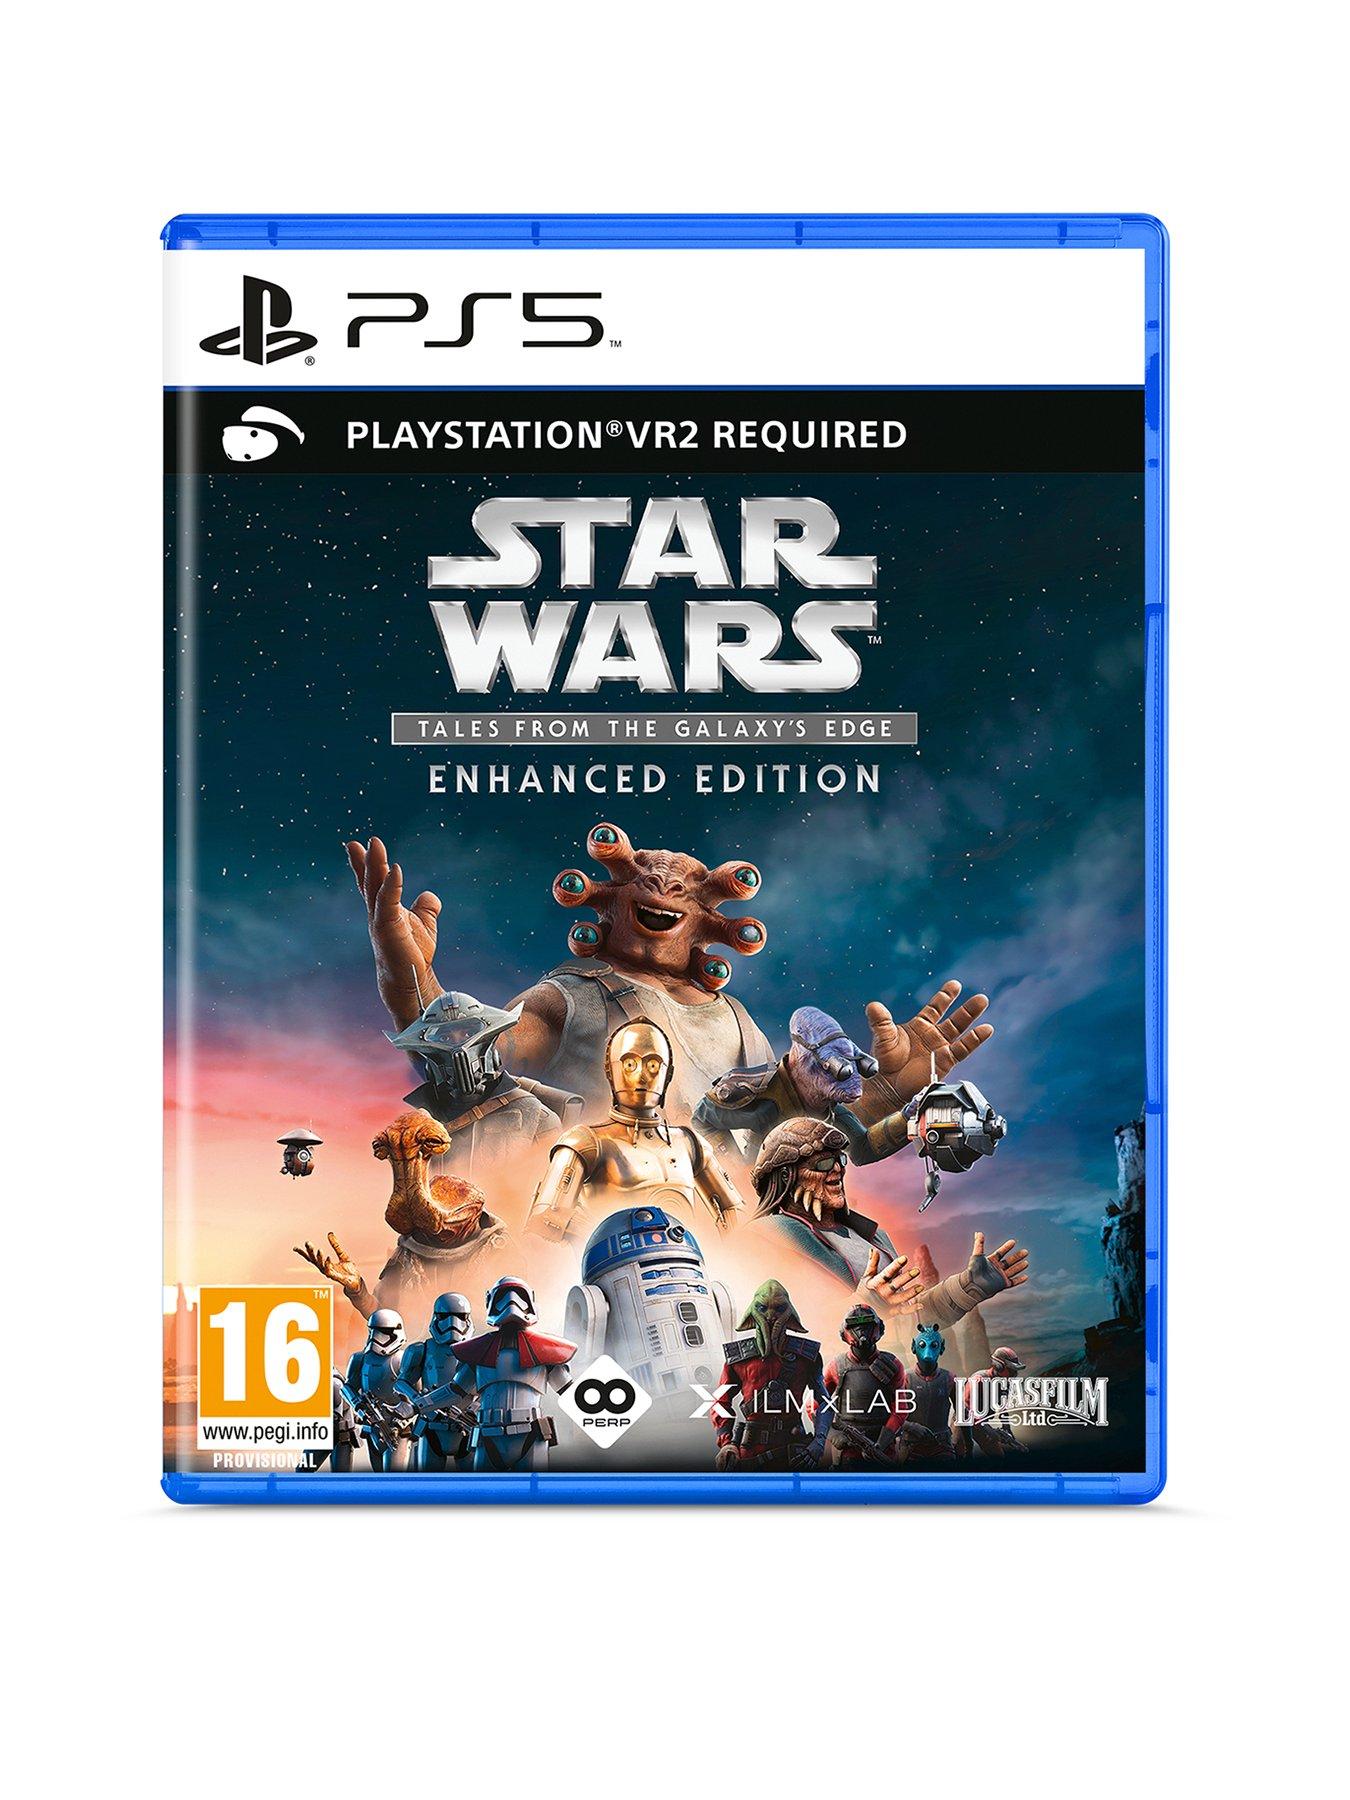 PlayStation VR Star Wars: Tales from the Galaxy's Edge - Enhanced Edition  (PlayStation VR2 Required)